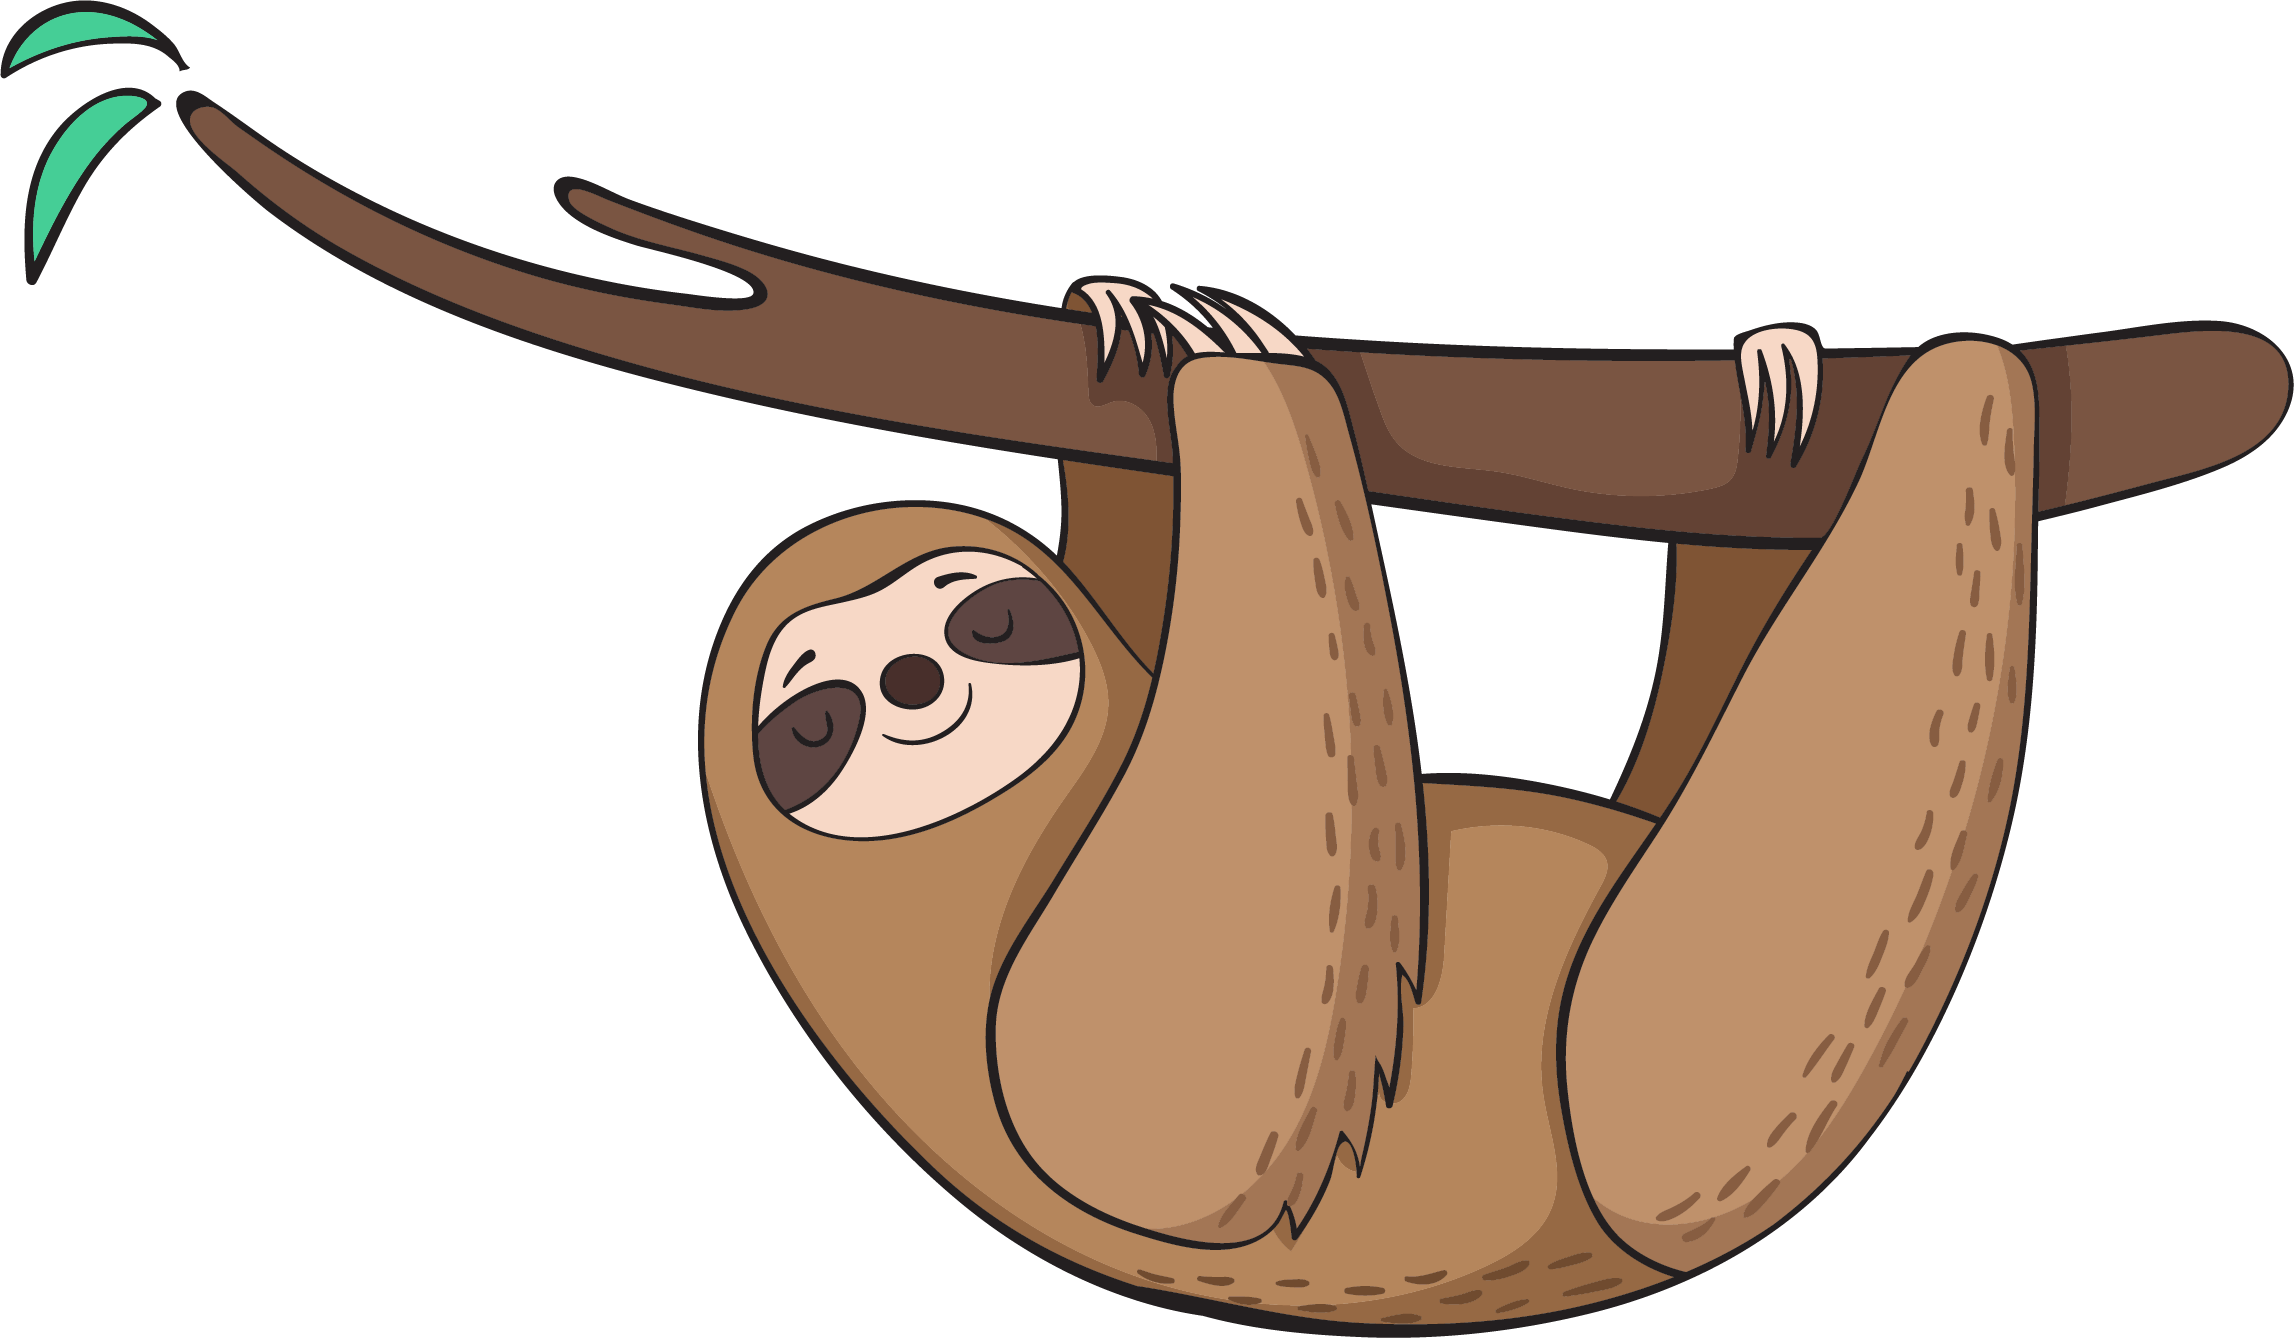 This visual is about sloth sloths ftestickers freetoedit #sloth #sloths #ft...